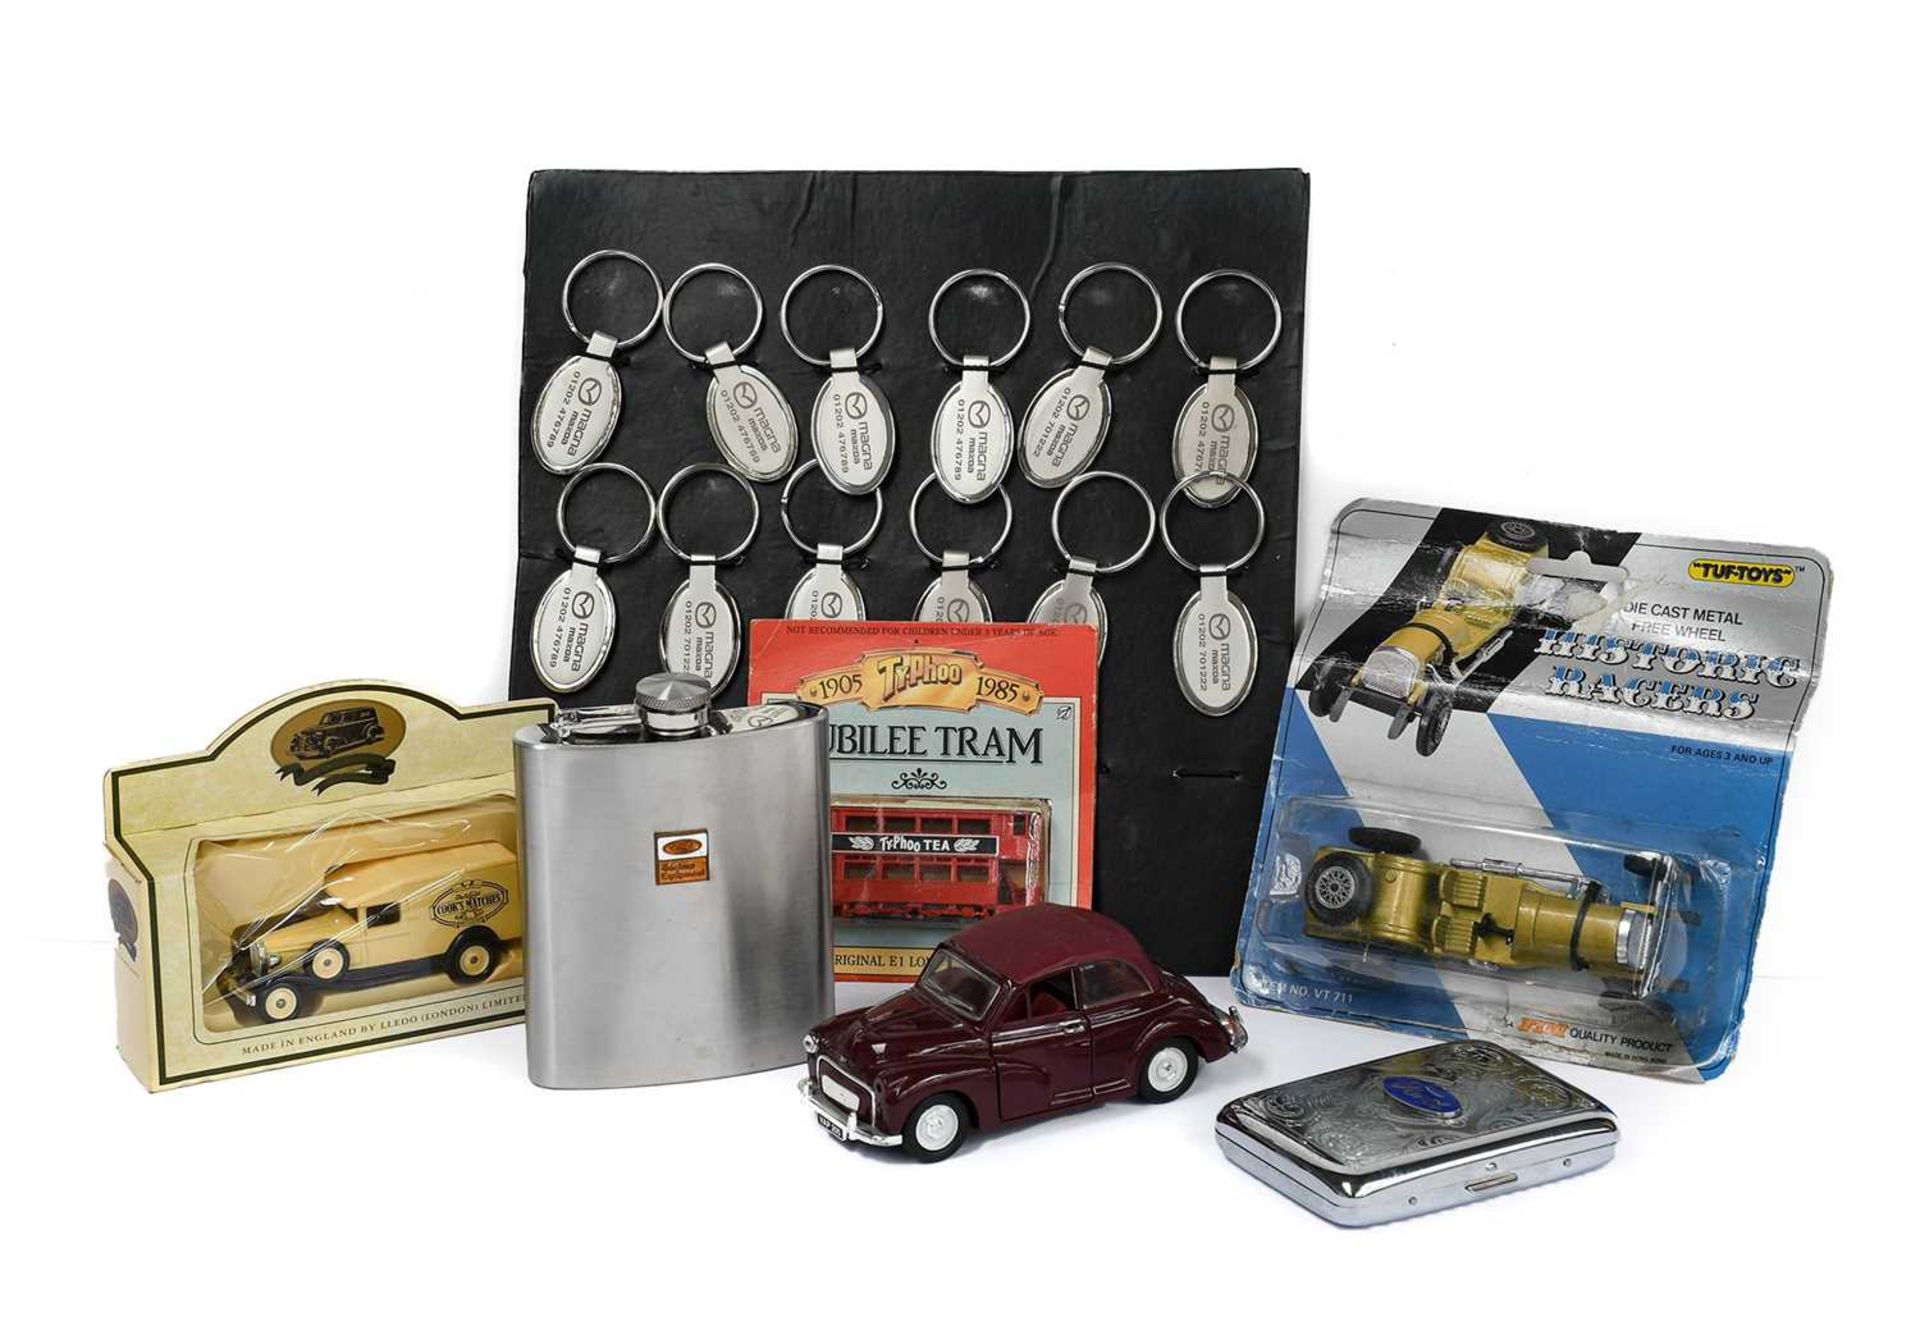 A Ford Tractors Stainless Steel 7oz Hipflask, a Ford Chrome Plated Cigarette Case, with engraved